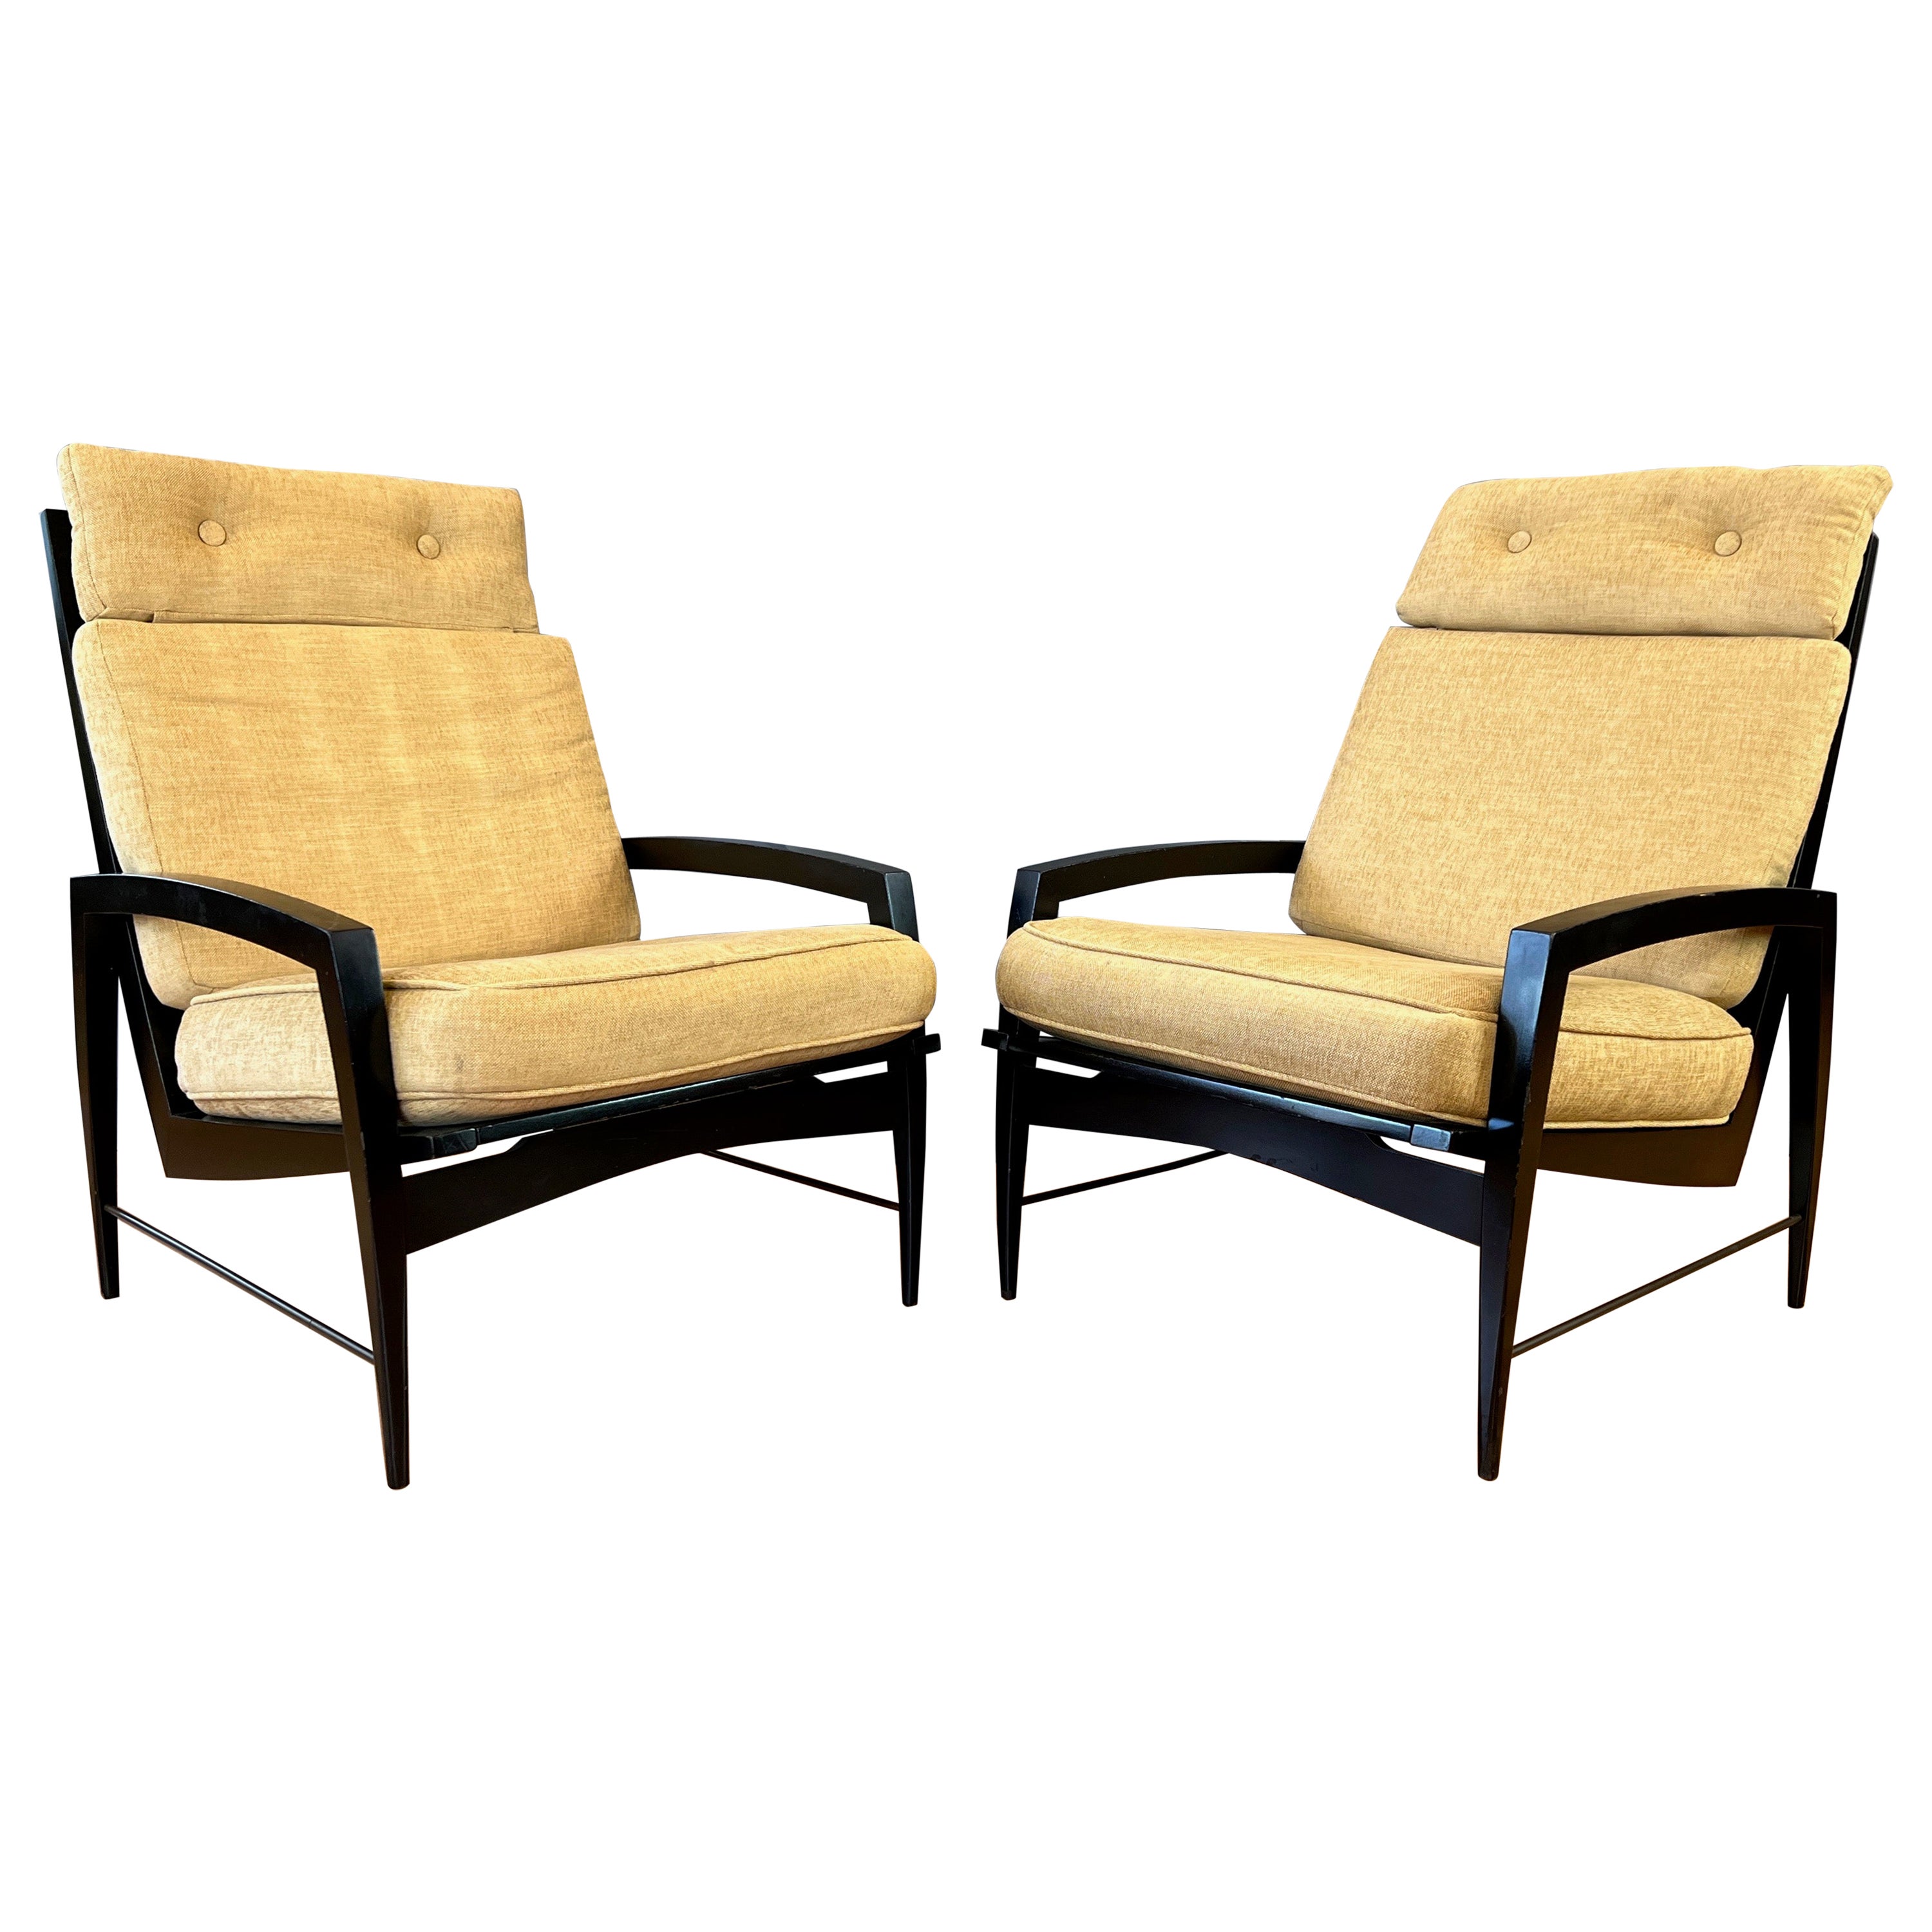 Pair of Dan Johnson for Selig Black Lacquered High-Back Lounge Chairs, 1950s